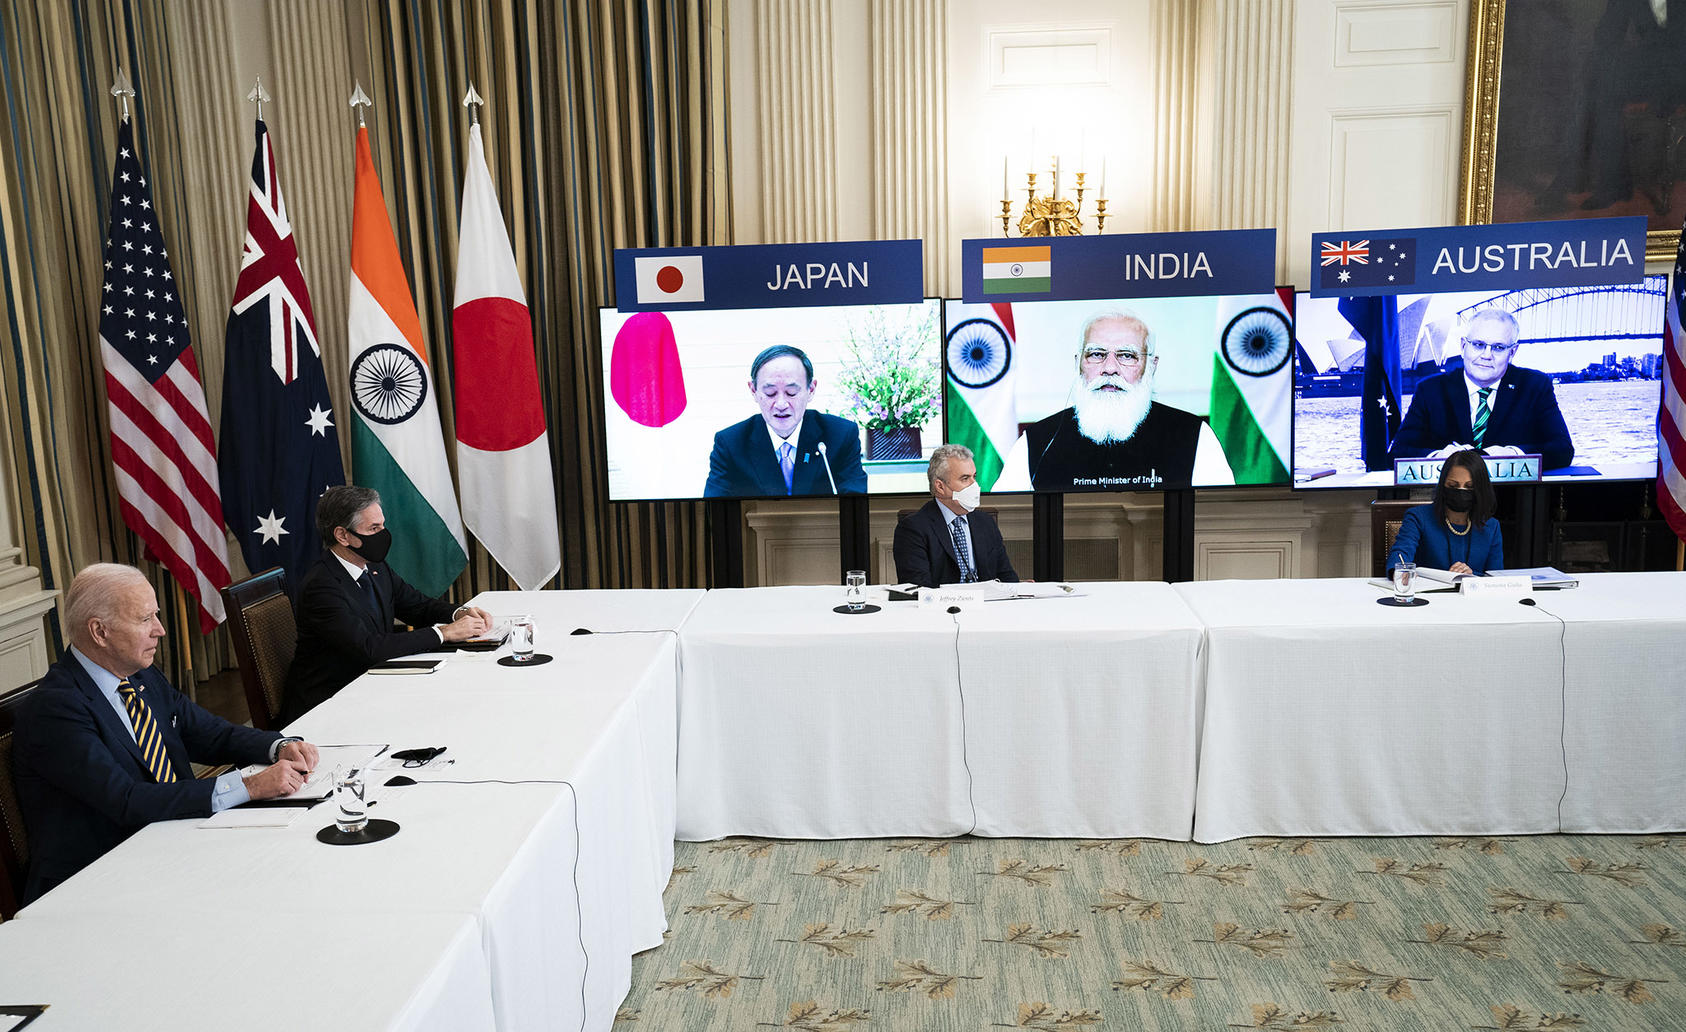 President Joe Biden meets virtually with Prime Minister Narendra Modi of India, on monitor, as well the leaders of Japan and Australia, at the White House in Washington. March 12, 2021. (Doug Mills/The New York Times)